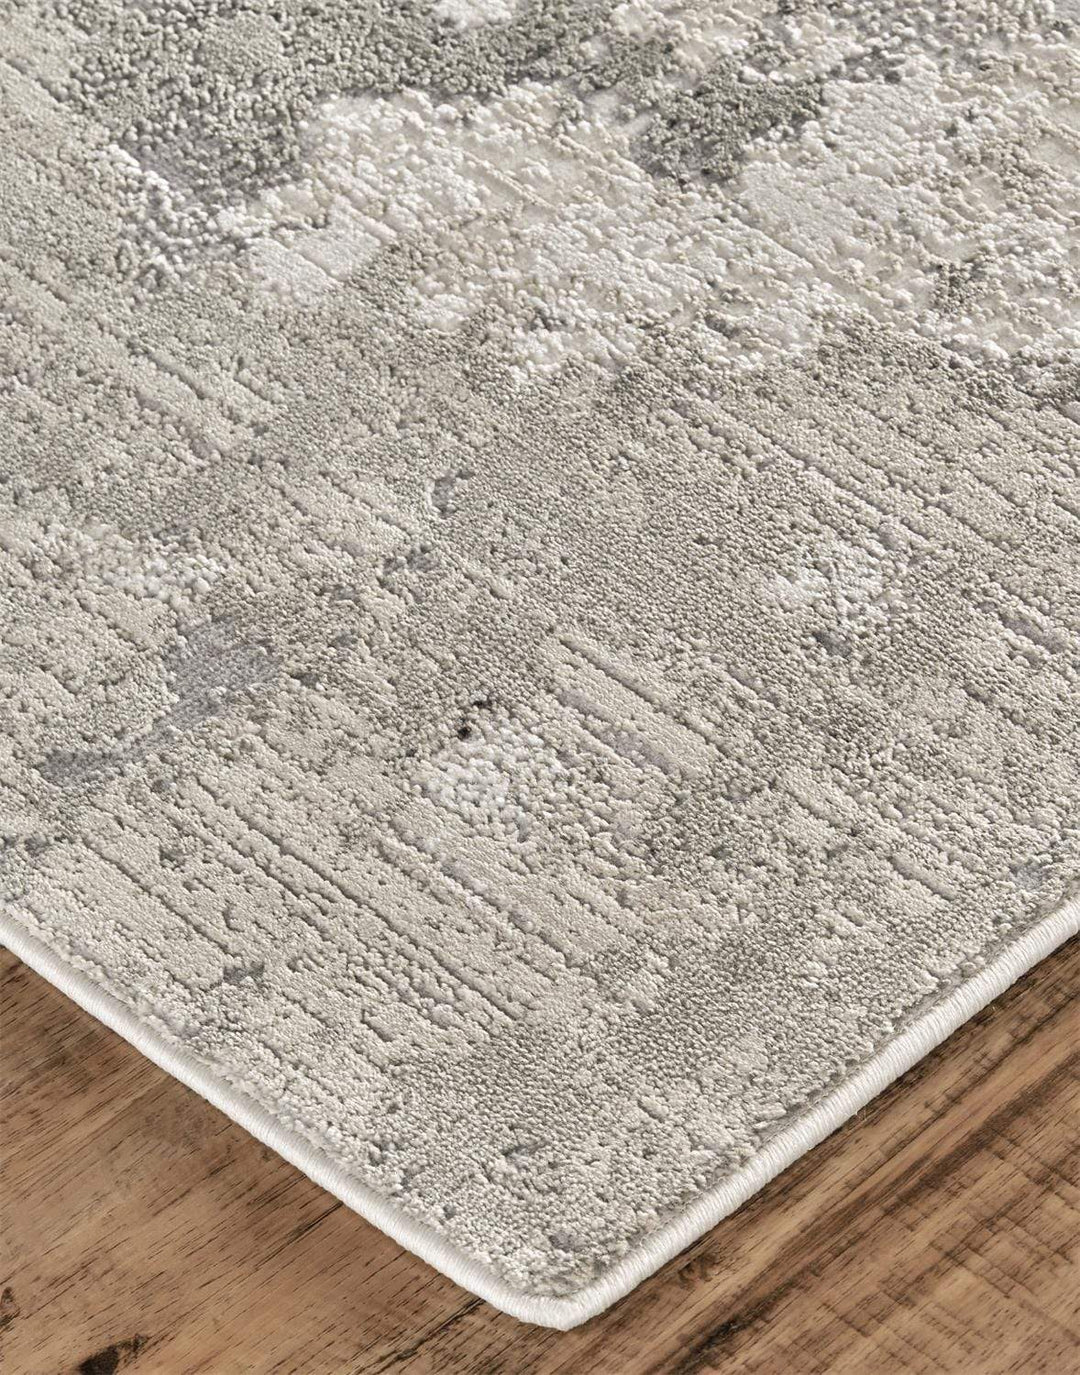 Feizy Feizy Prasad Contmporary Watercolor Rug - Available in 5 Sizes - Ivory & Light Gray